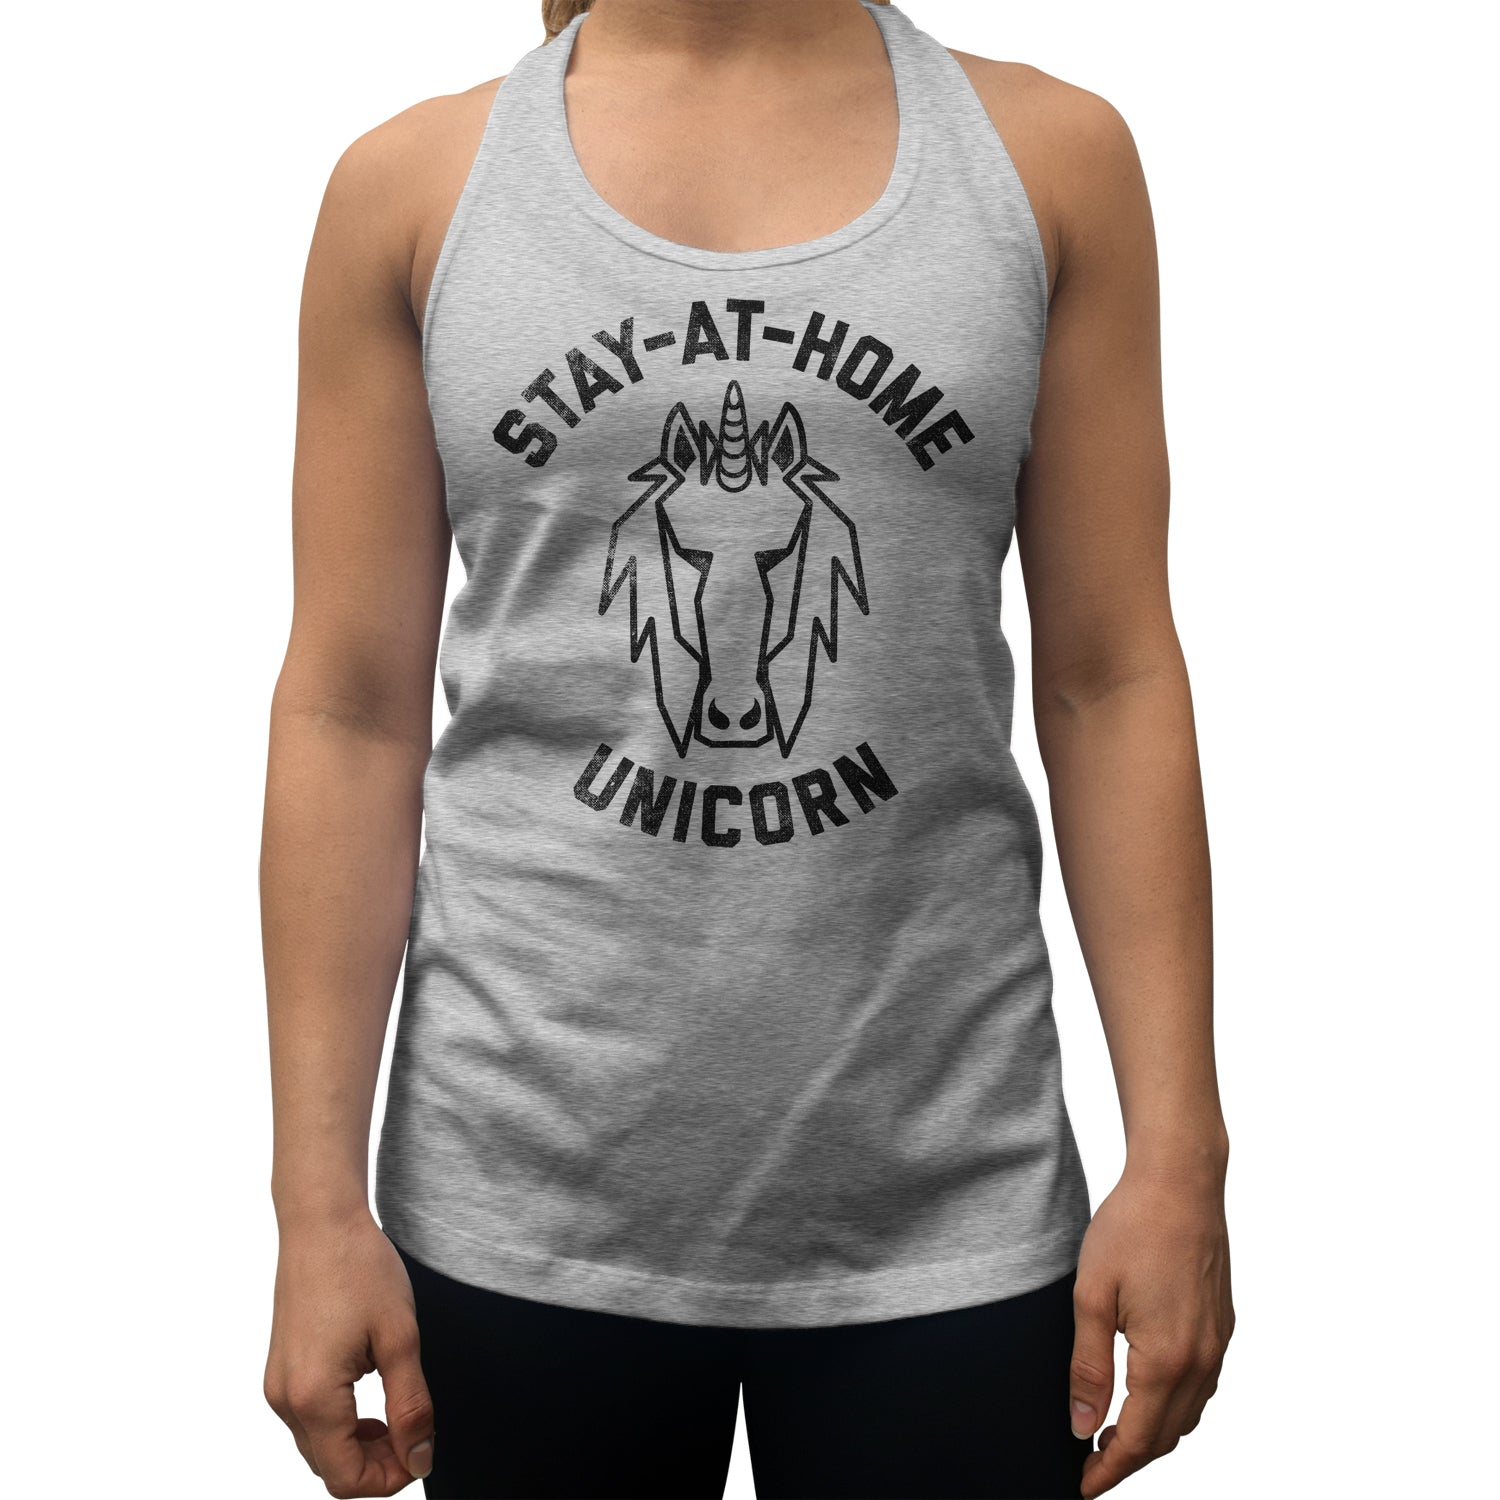 Women's Stay at Home Unicorn Racerback Tank Top